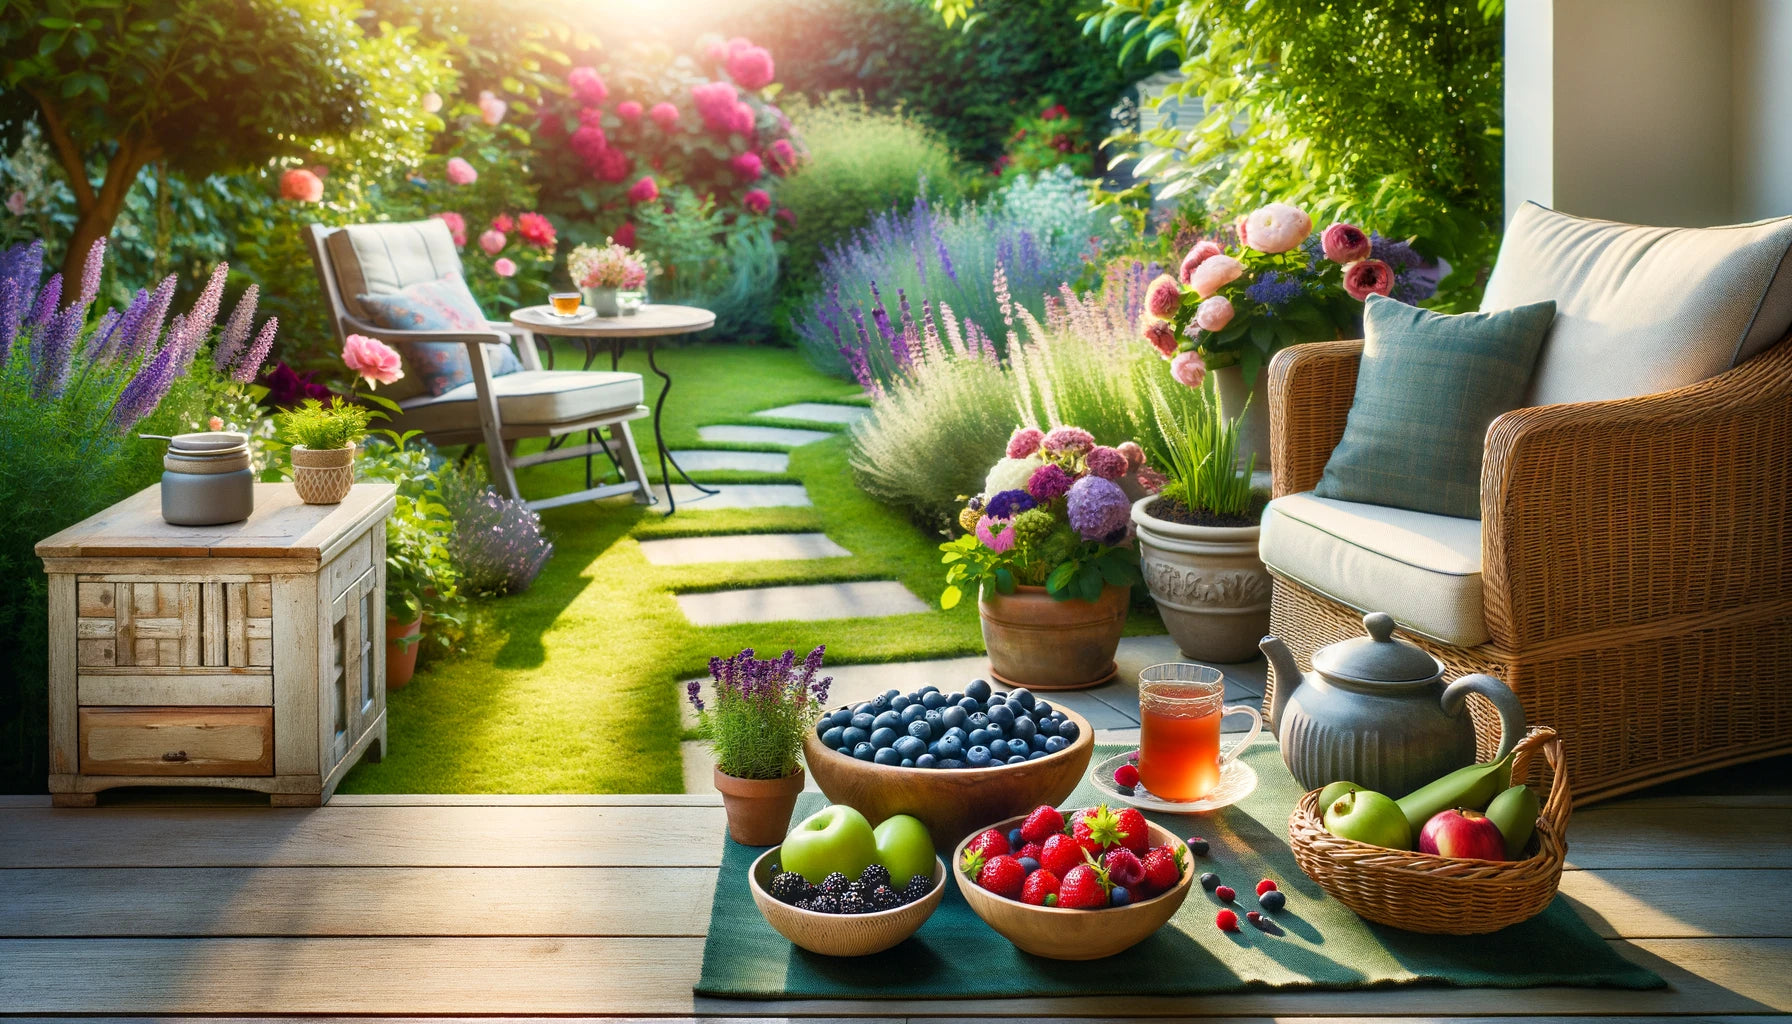 A serene garden patio with a comfortable seating area, a table with herbal teas, and bowls of antioxidant-rich fruits like blueberries, raspberries, and strawberries